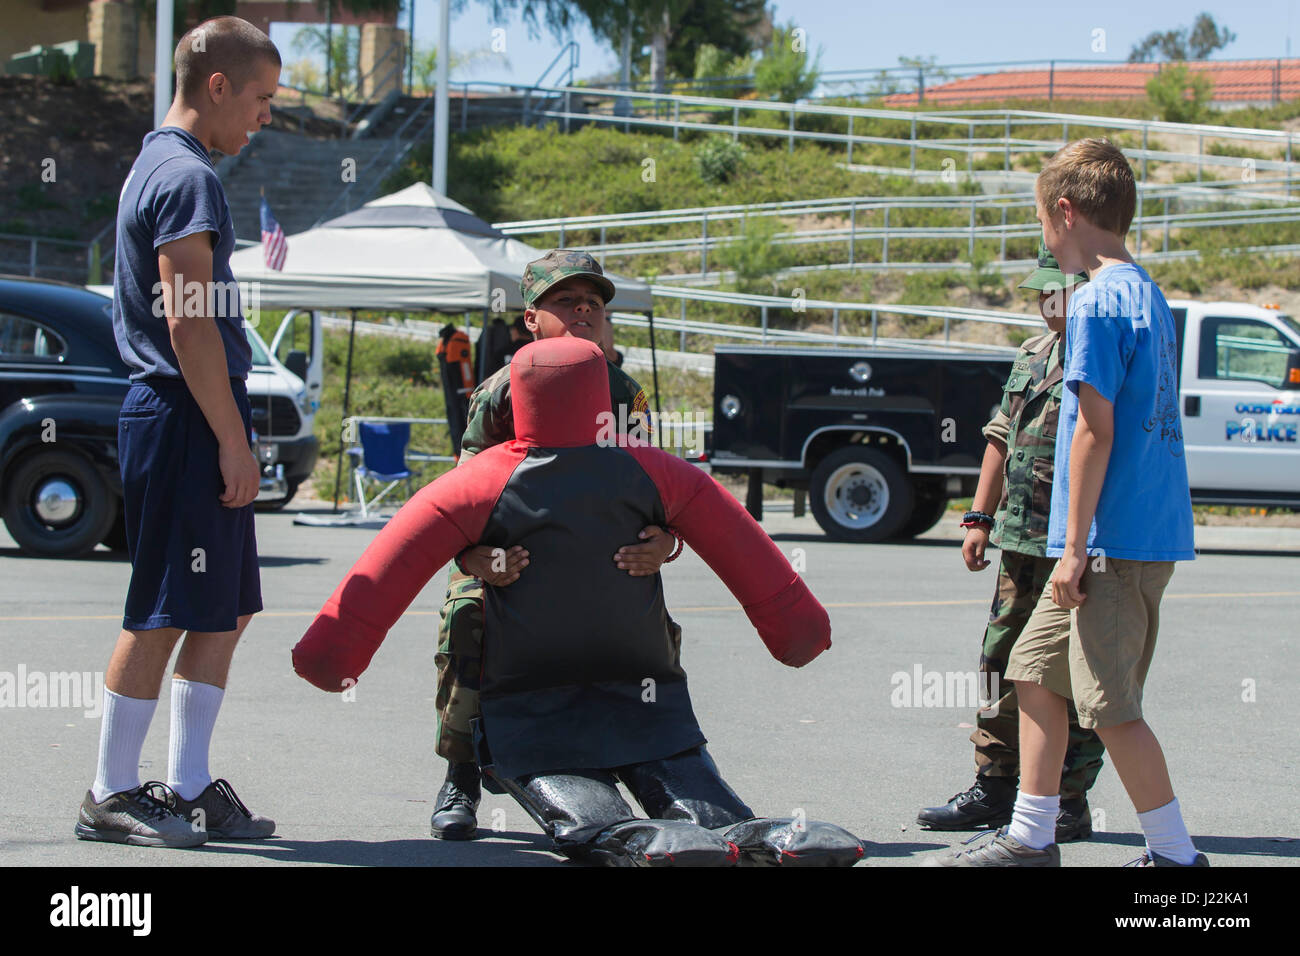 Recruits with the 51st Fire Academy, coach children trying to drag a dummy during the 1st Annual City of Oceanside Public Safety Fair at El Camino High School football field in Oceanside, Calif., April 22, 2017. (U.S. Marine Corps photo by Lance Cpl. Brooke Woods) Stock Photo